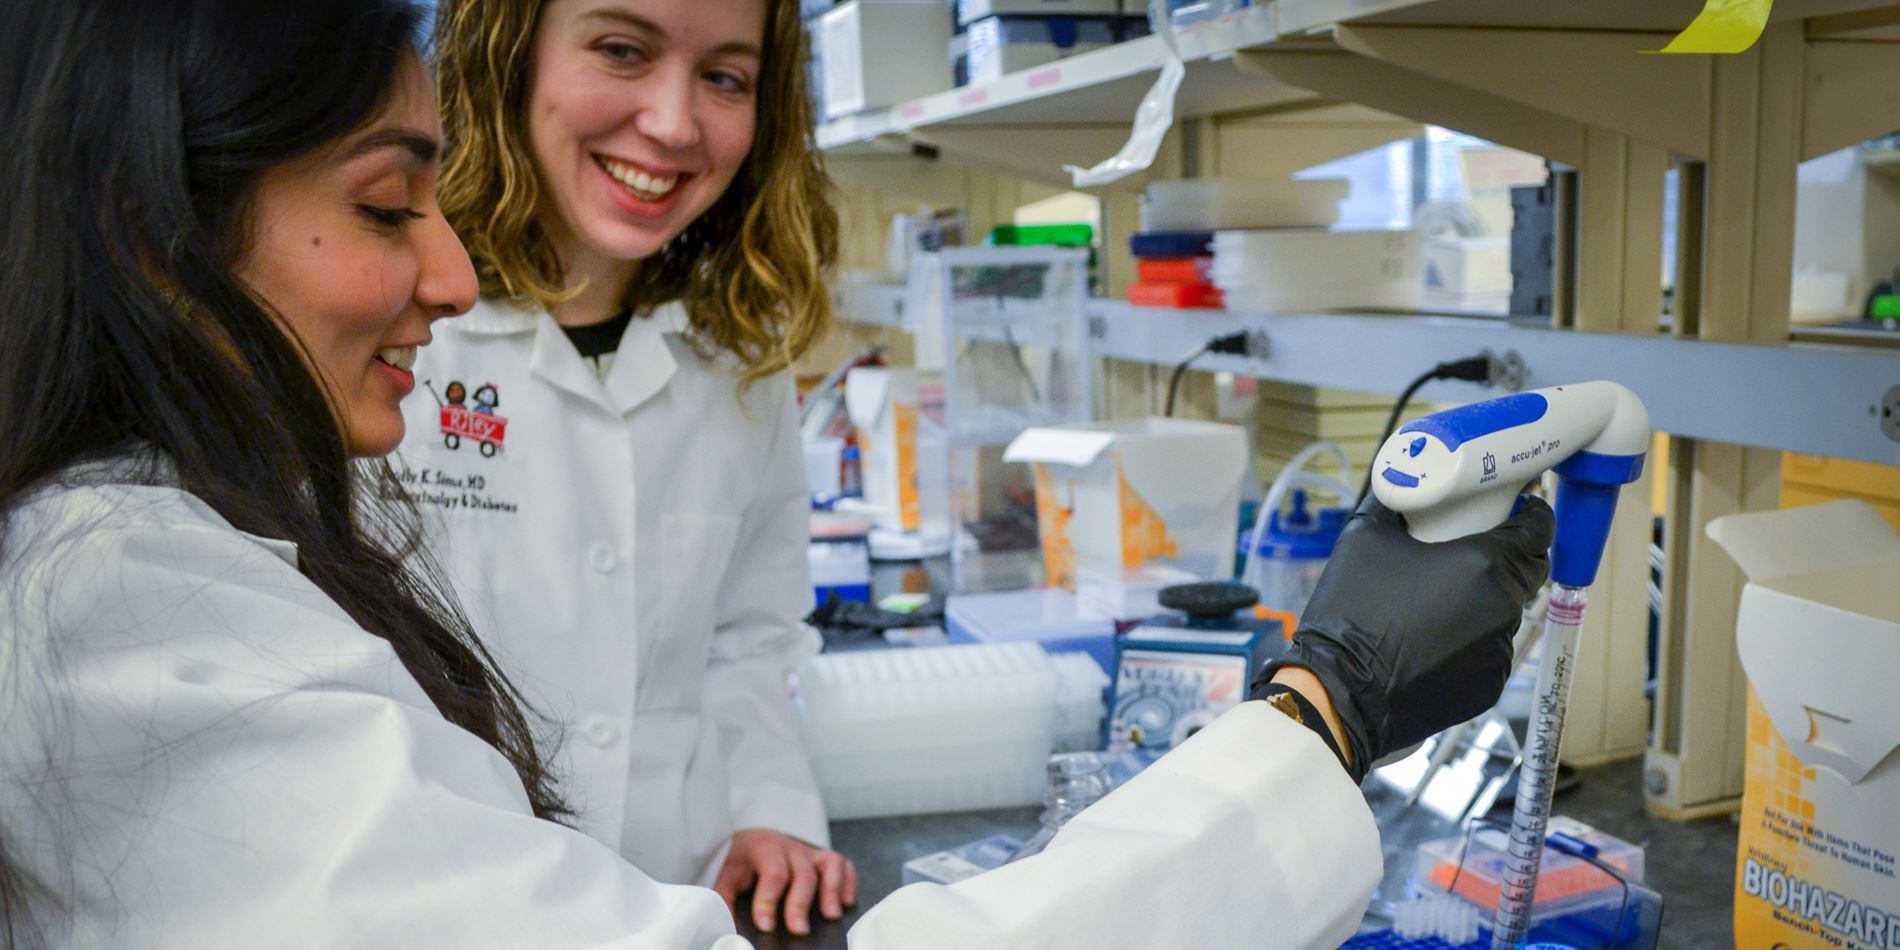 Dr. Emily Sims and Dr. Sara Ibrahim working in a laboratory.